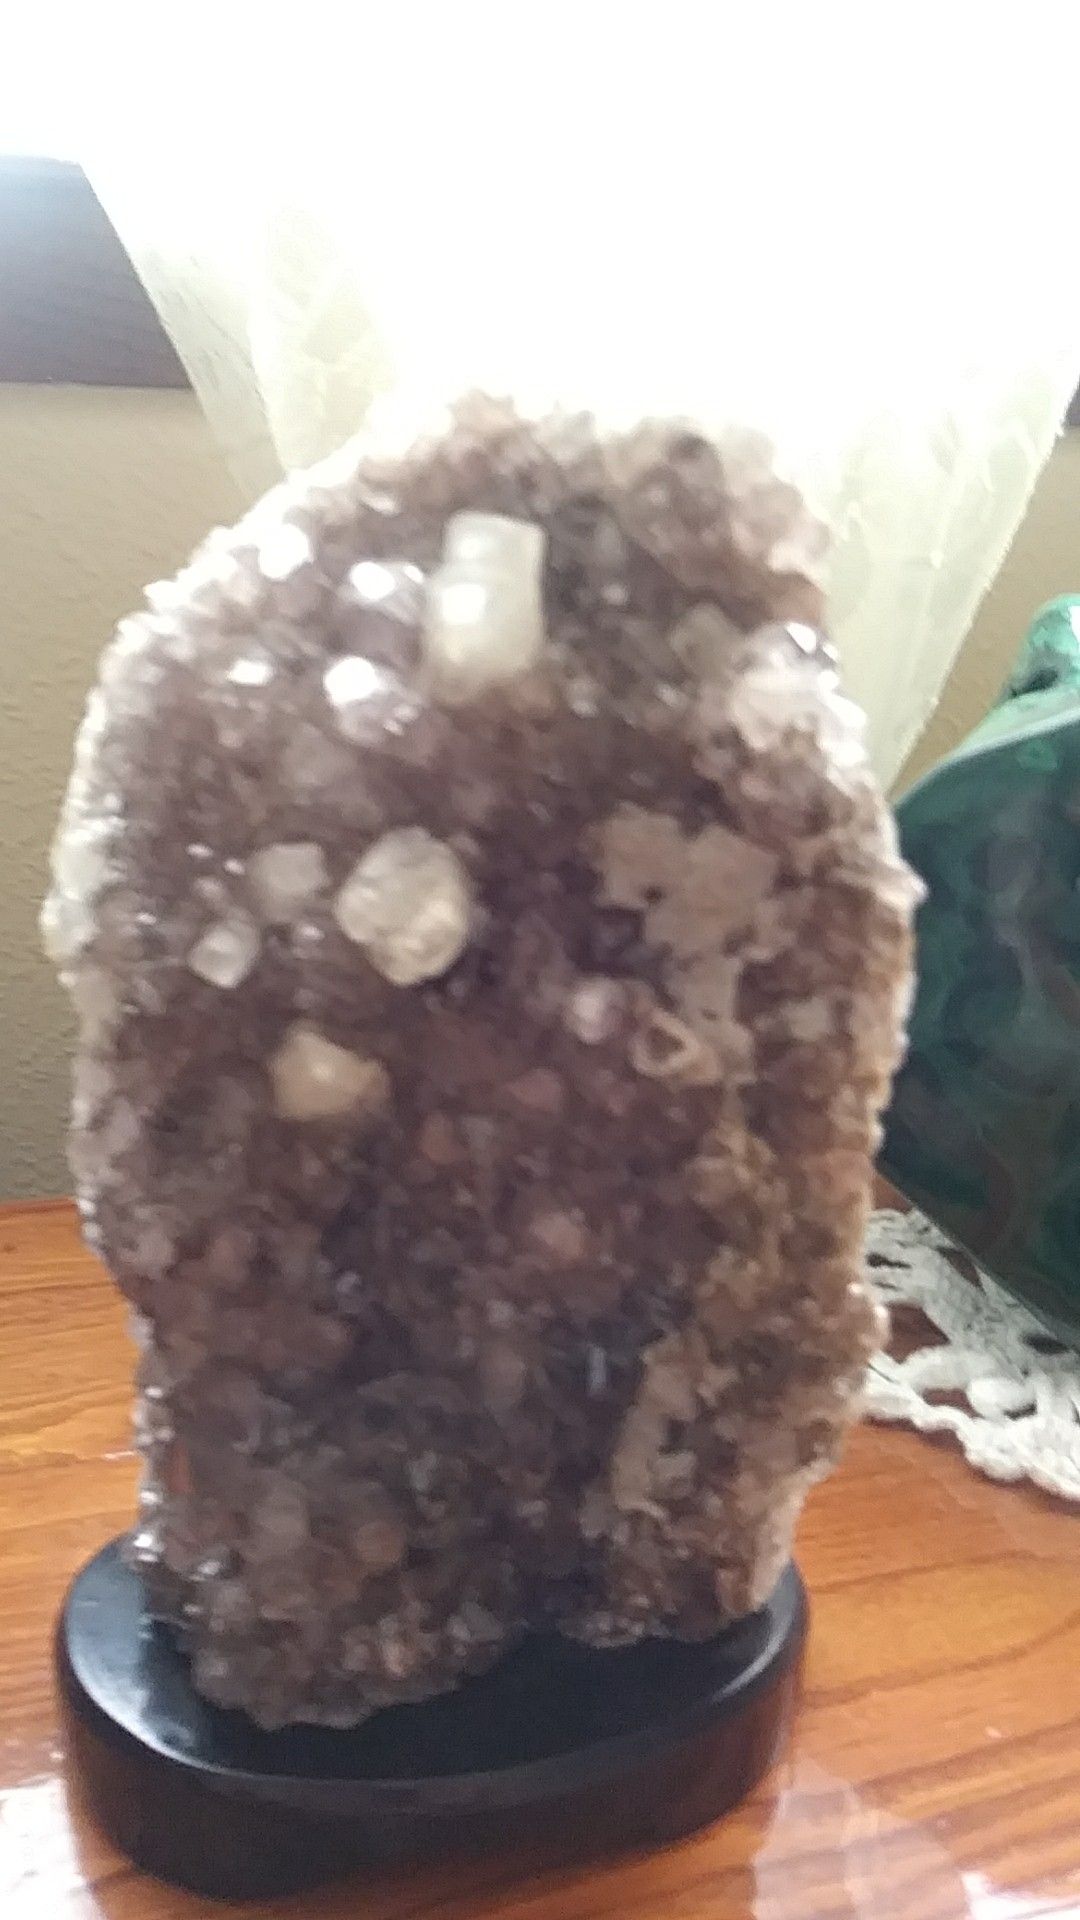 Amethyst with calcite